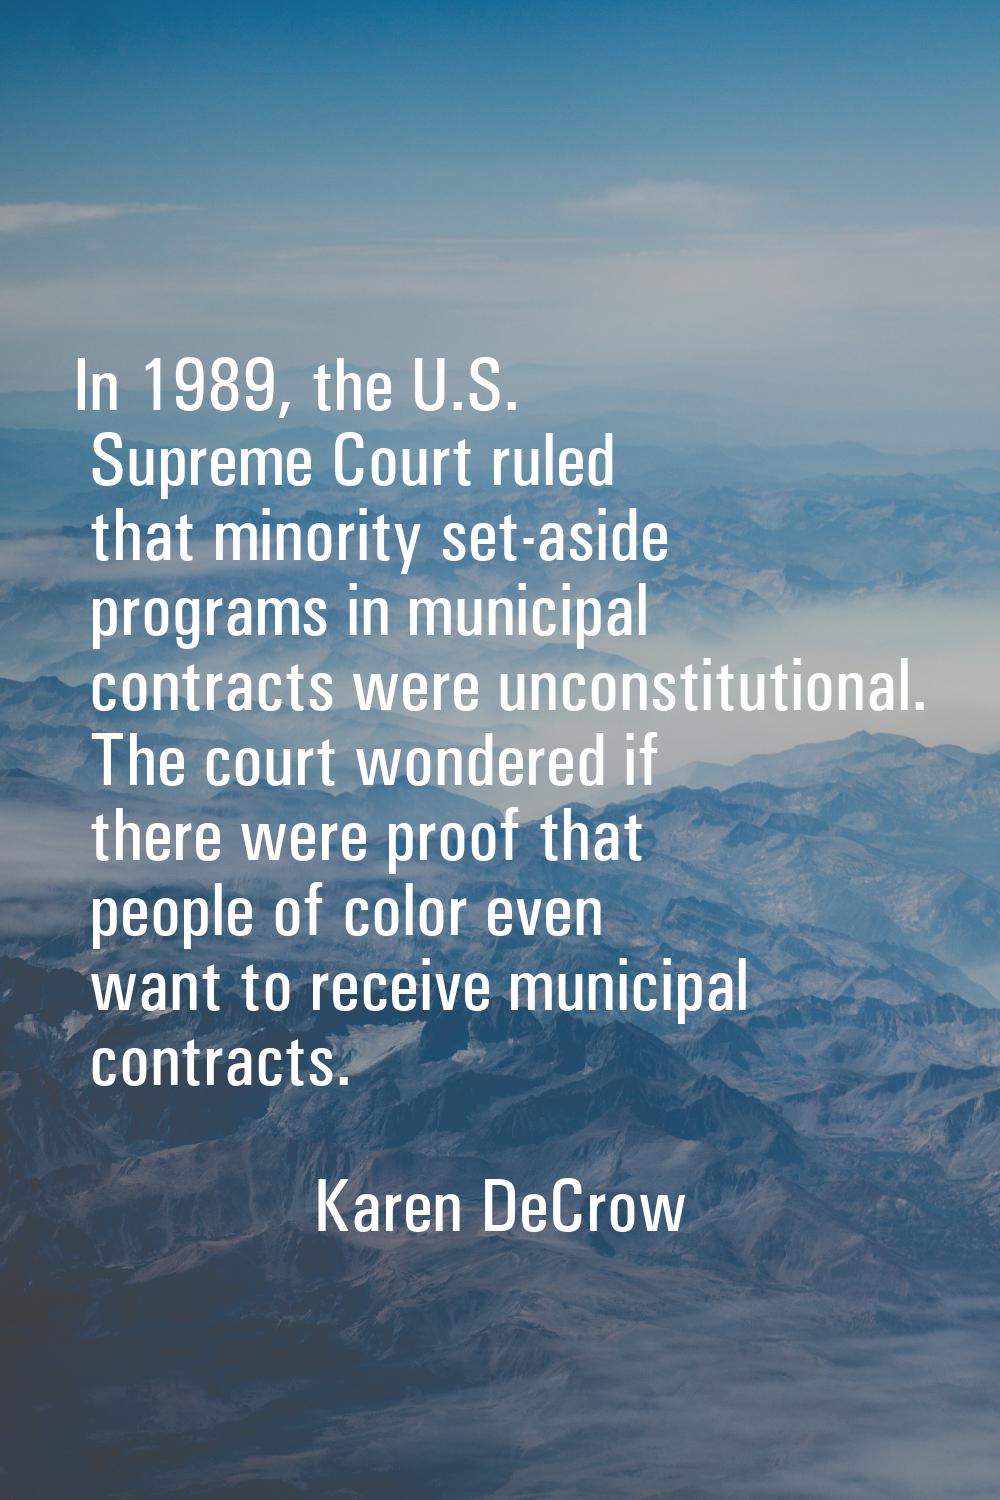 In 1989, the U.S. Supreme Court ruled that minority set-aside programs in municipal contracts were 